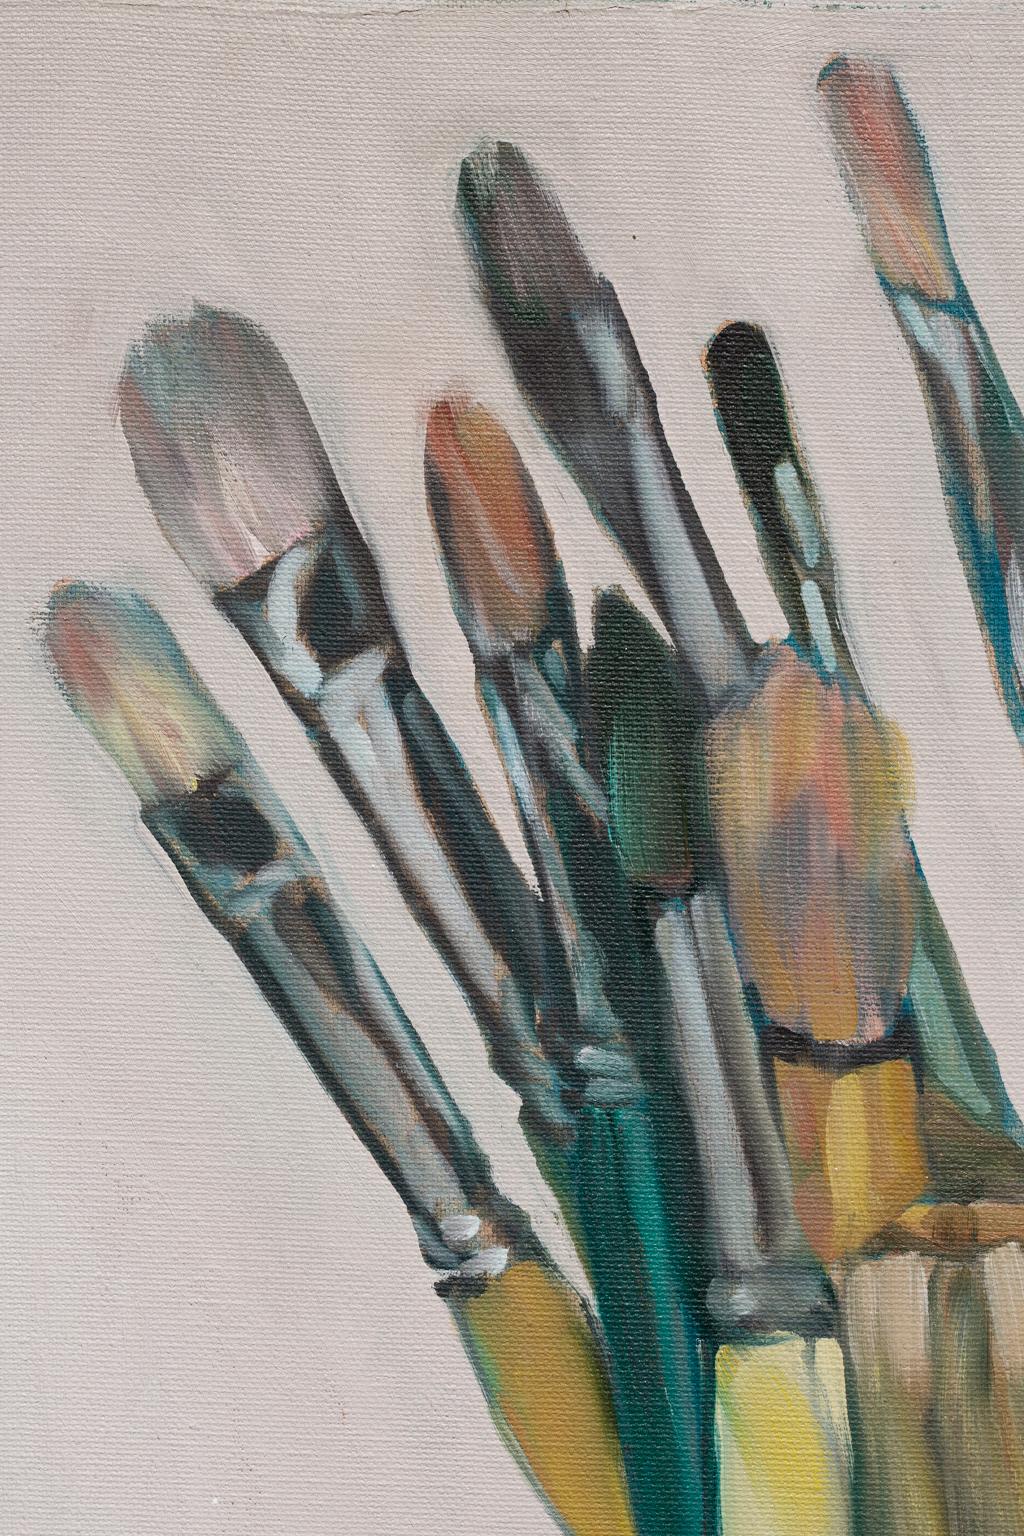 This still-life is an acrylic on canvas work that depicts a jar full of various paint brushes bunched together brushes up. In contrast to many still-lifes that depict the setting that the still-life occupies, this jar occupies a white space that